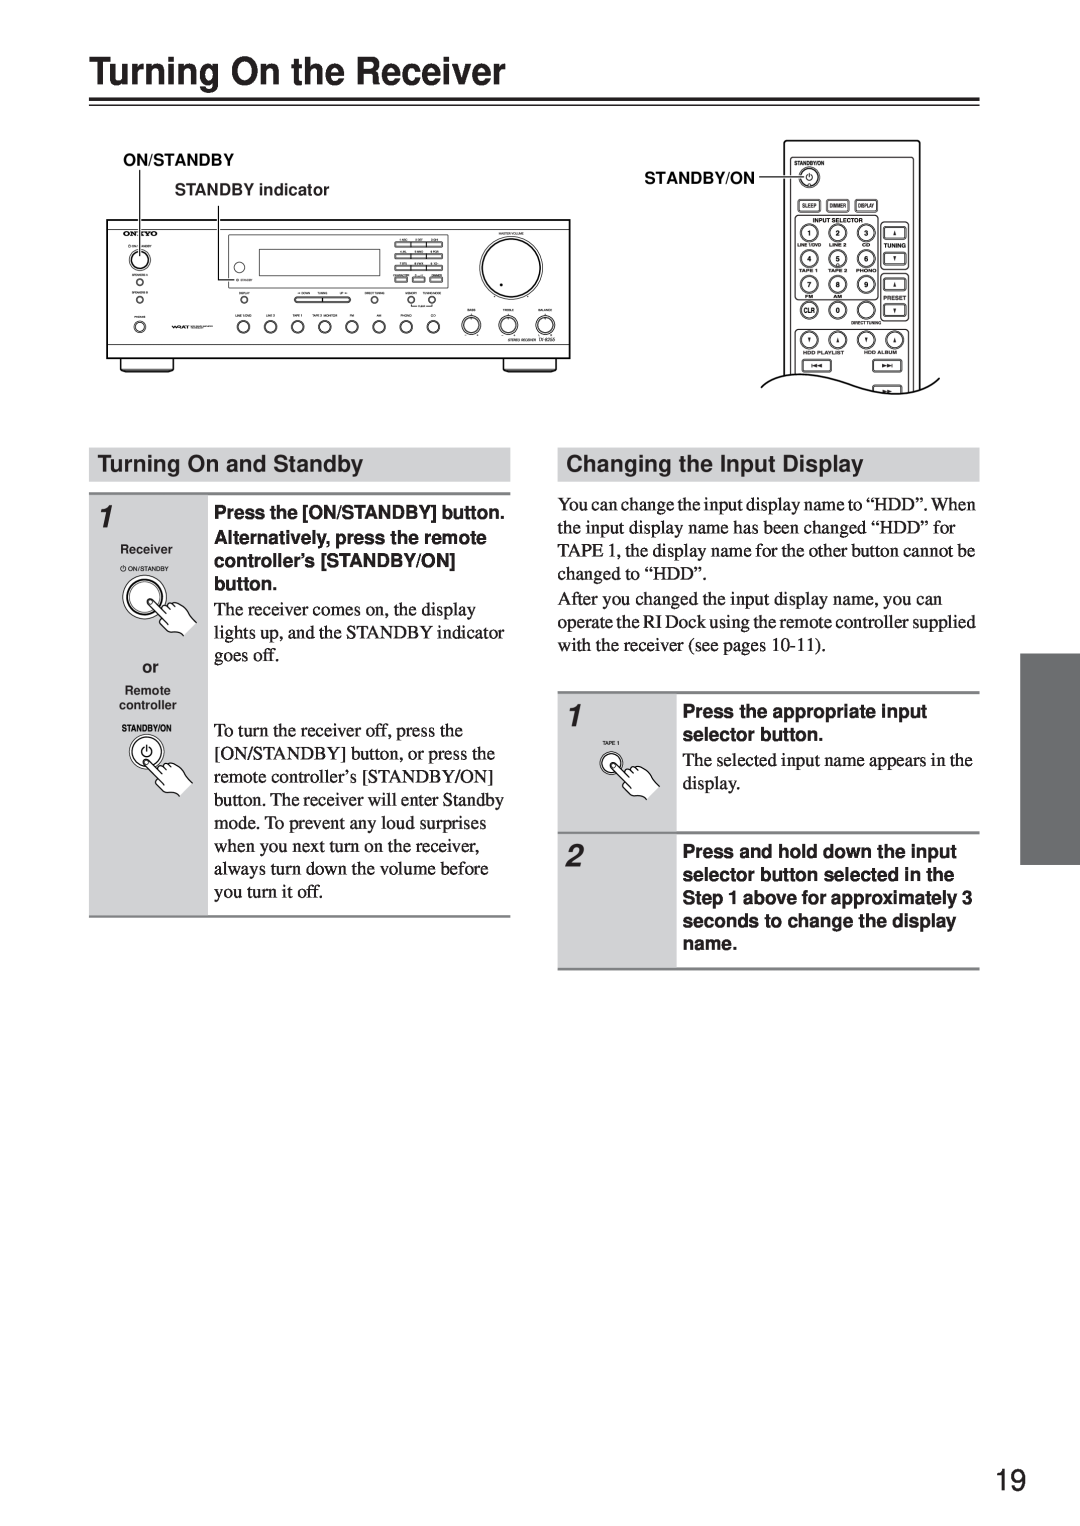 Onkyo TX-8255 instruction manual Turning On the Receiver, Turning On and Standby, Changing the Input Display, display 